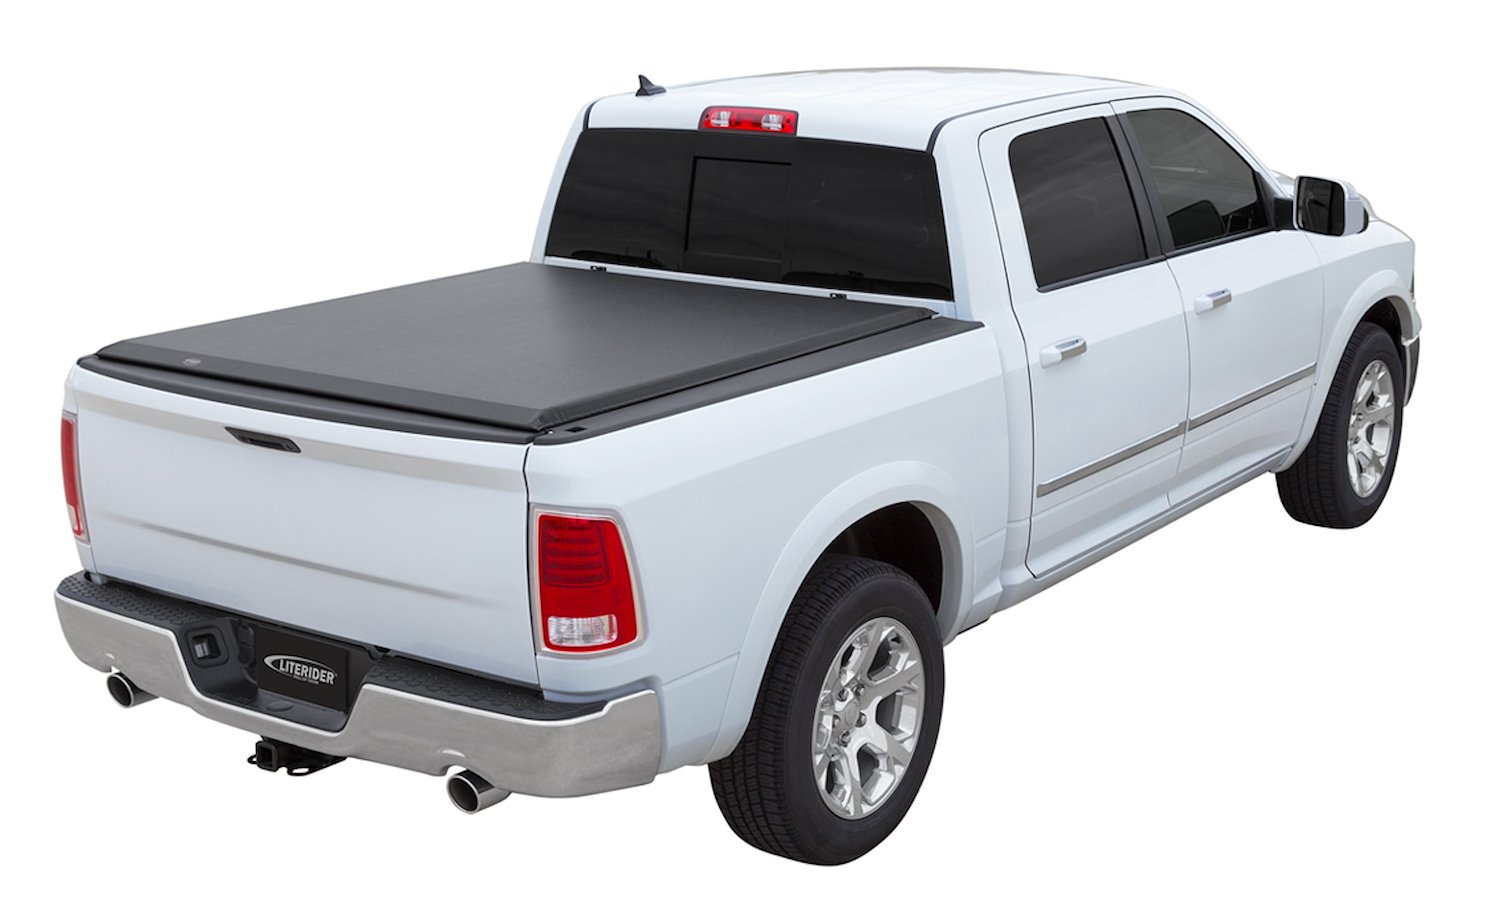 LITERIDER Roll-Up Tonneau Cover, Fits Select Ram 1500,